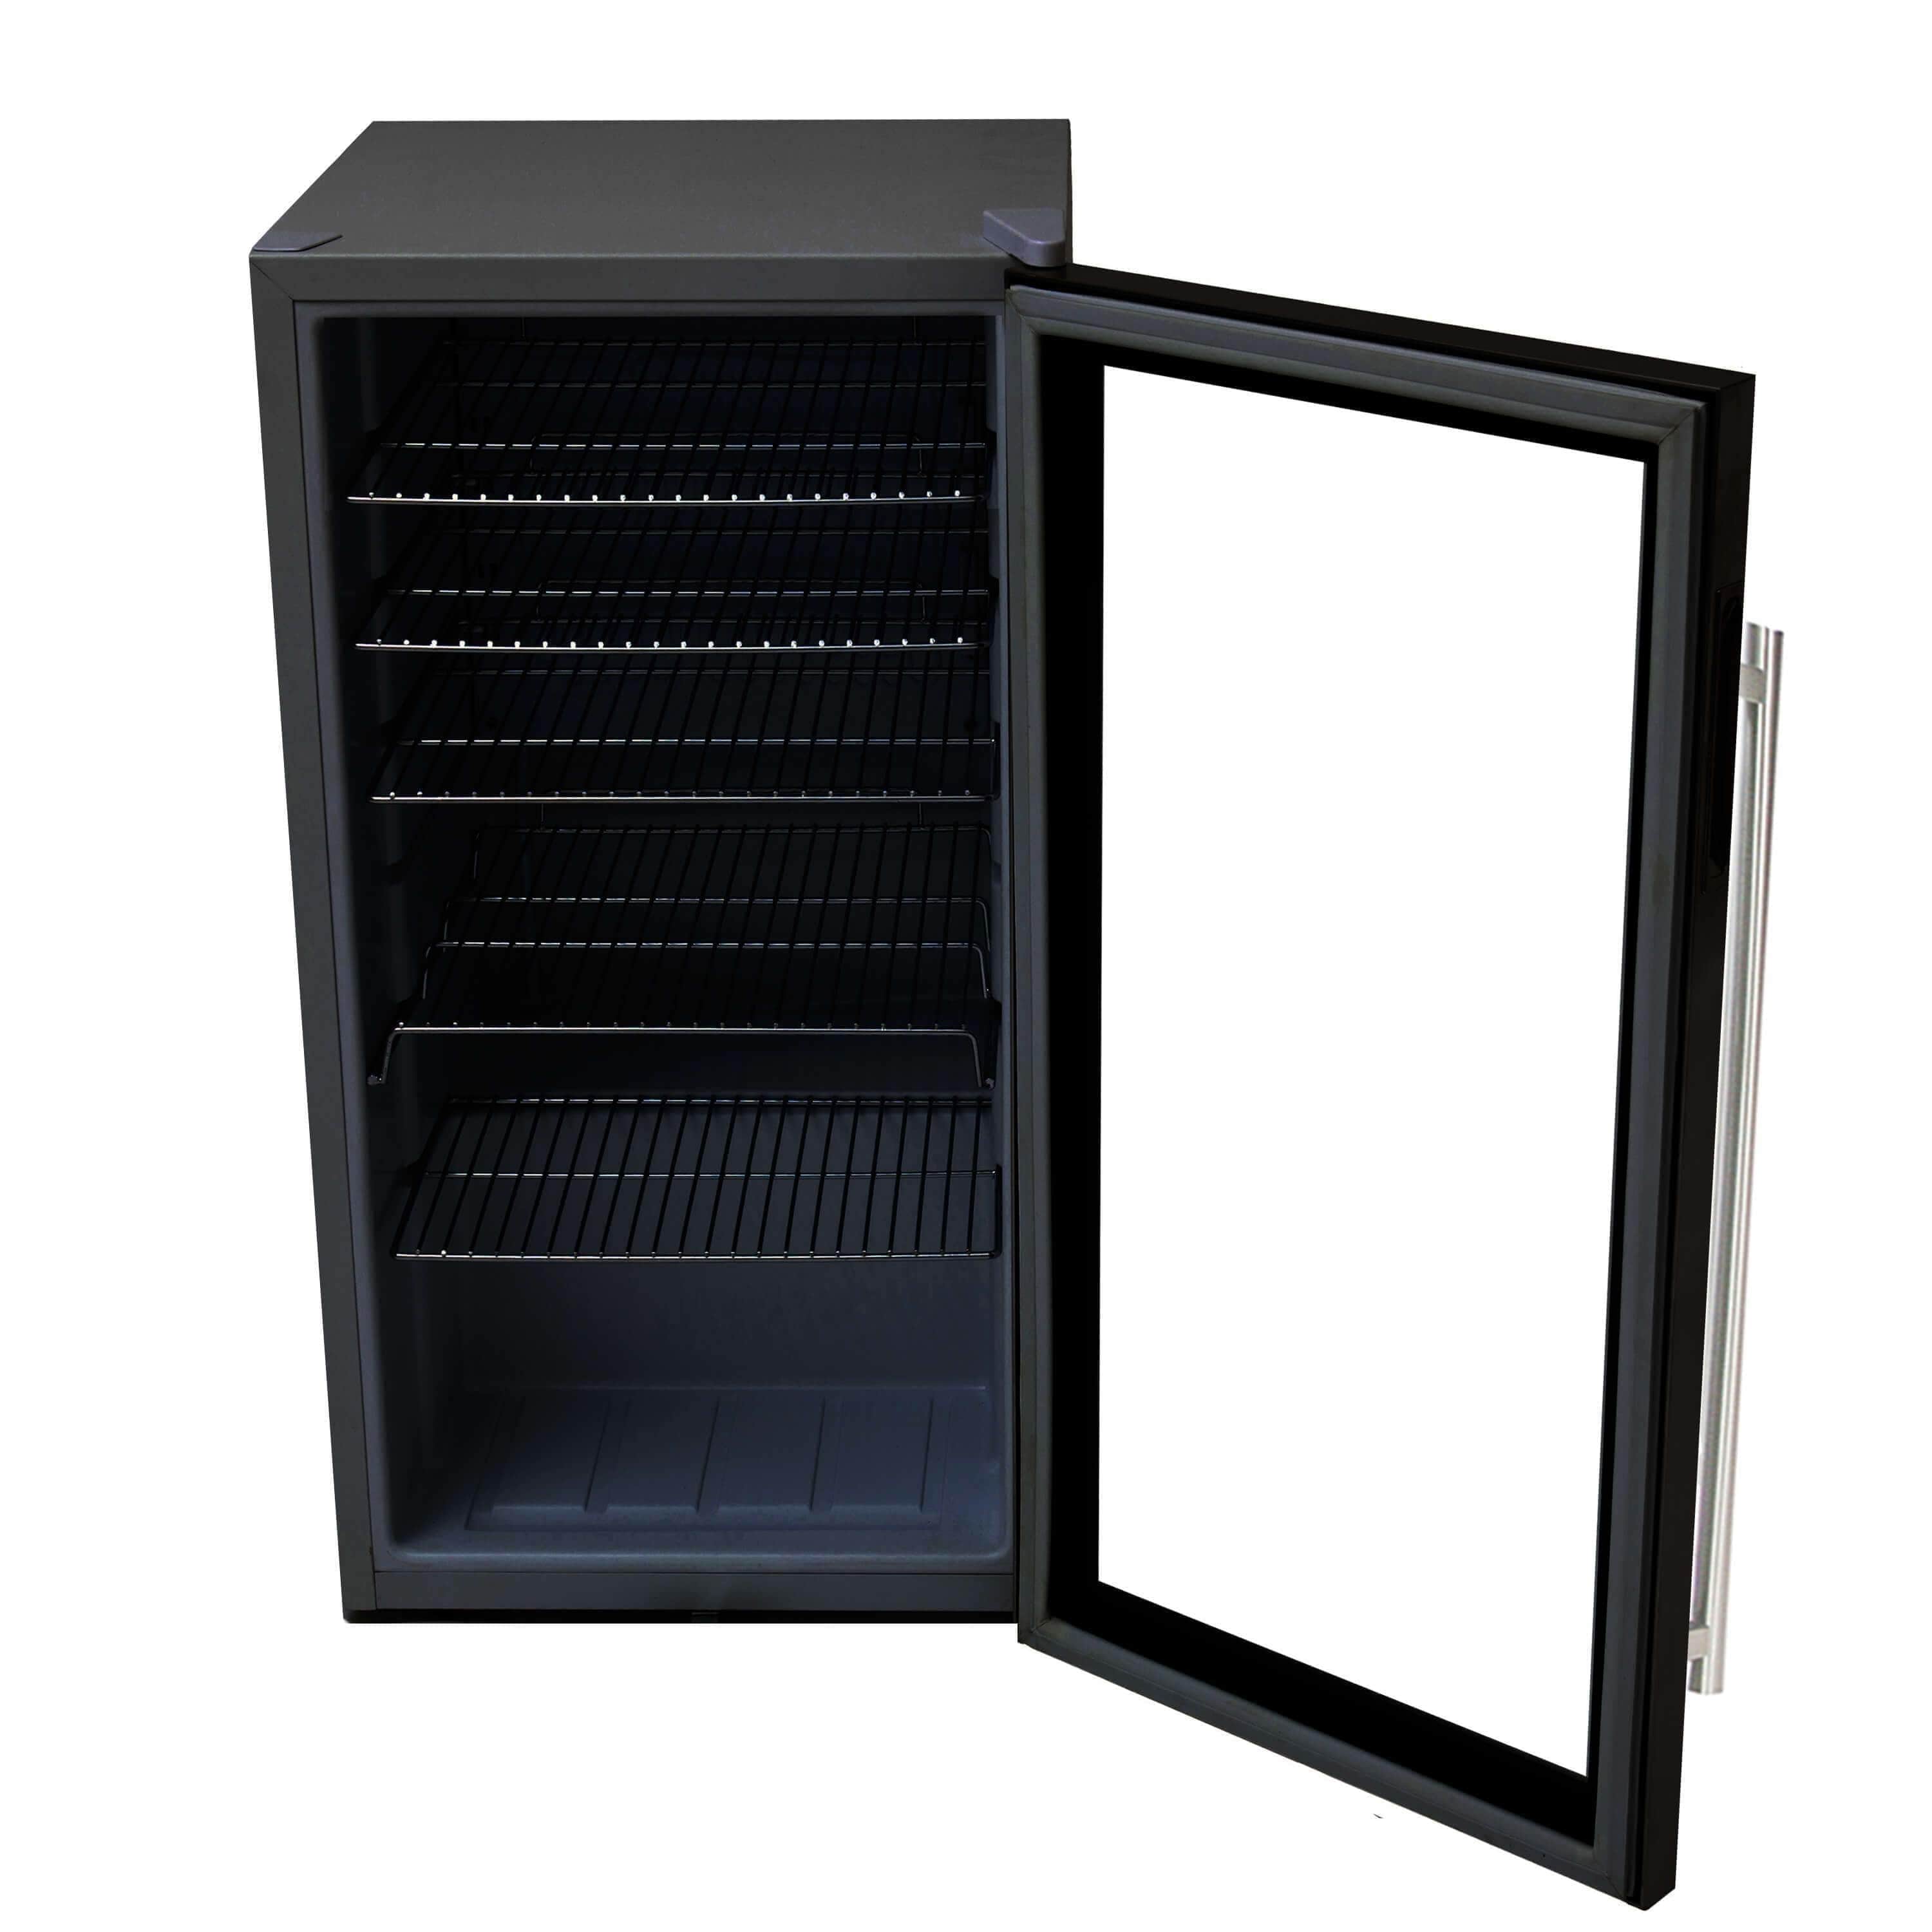 Whynter Beverage Refrigerator - Stainless Steel with internal fan BR-130SB Wine Coolers Empire